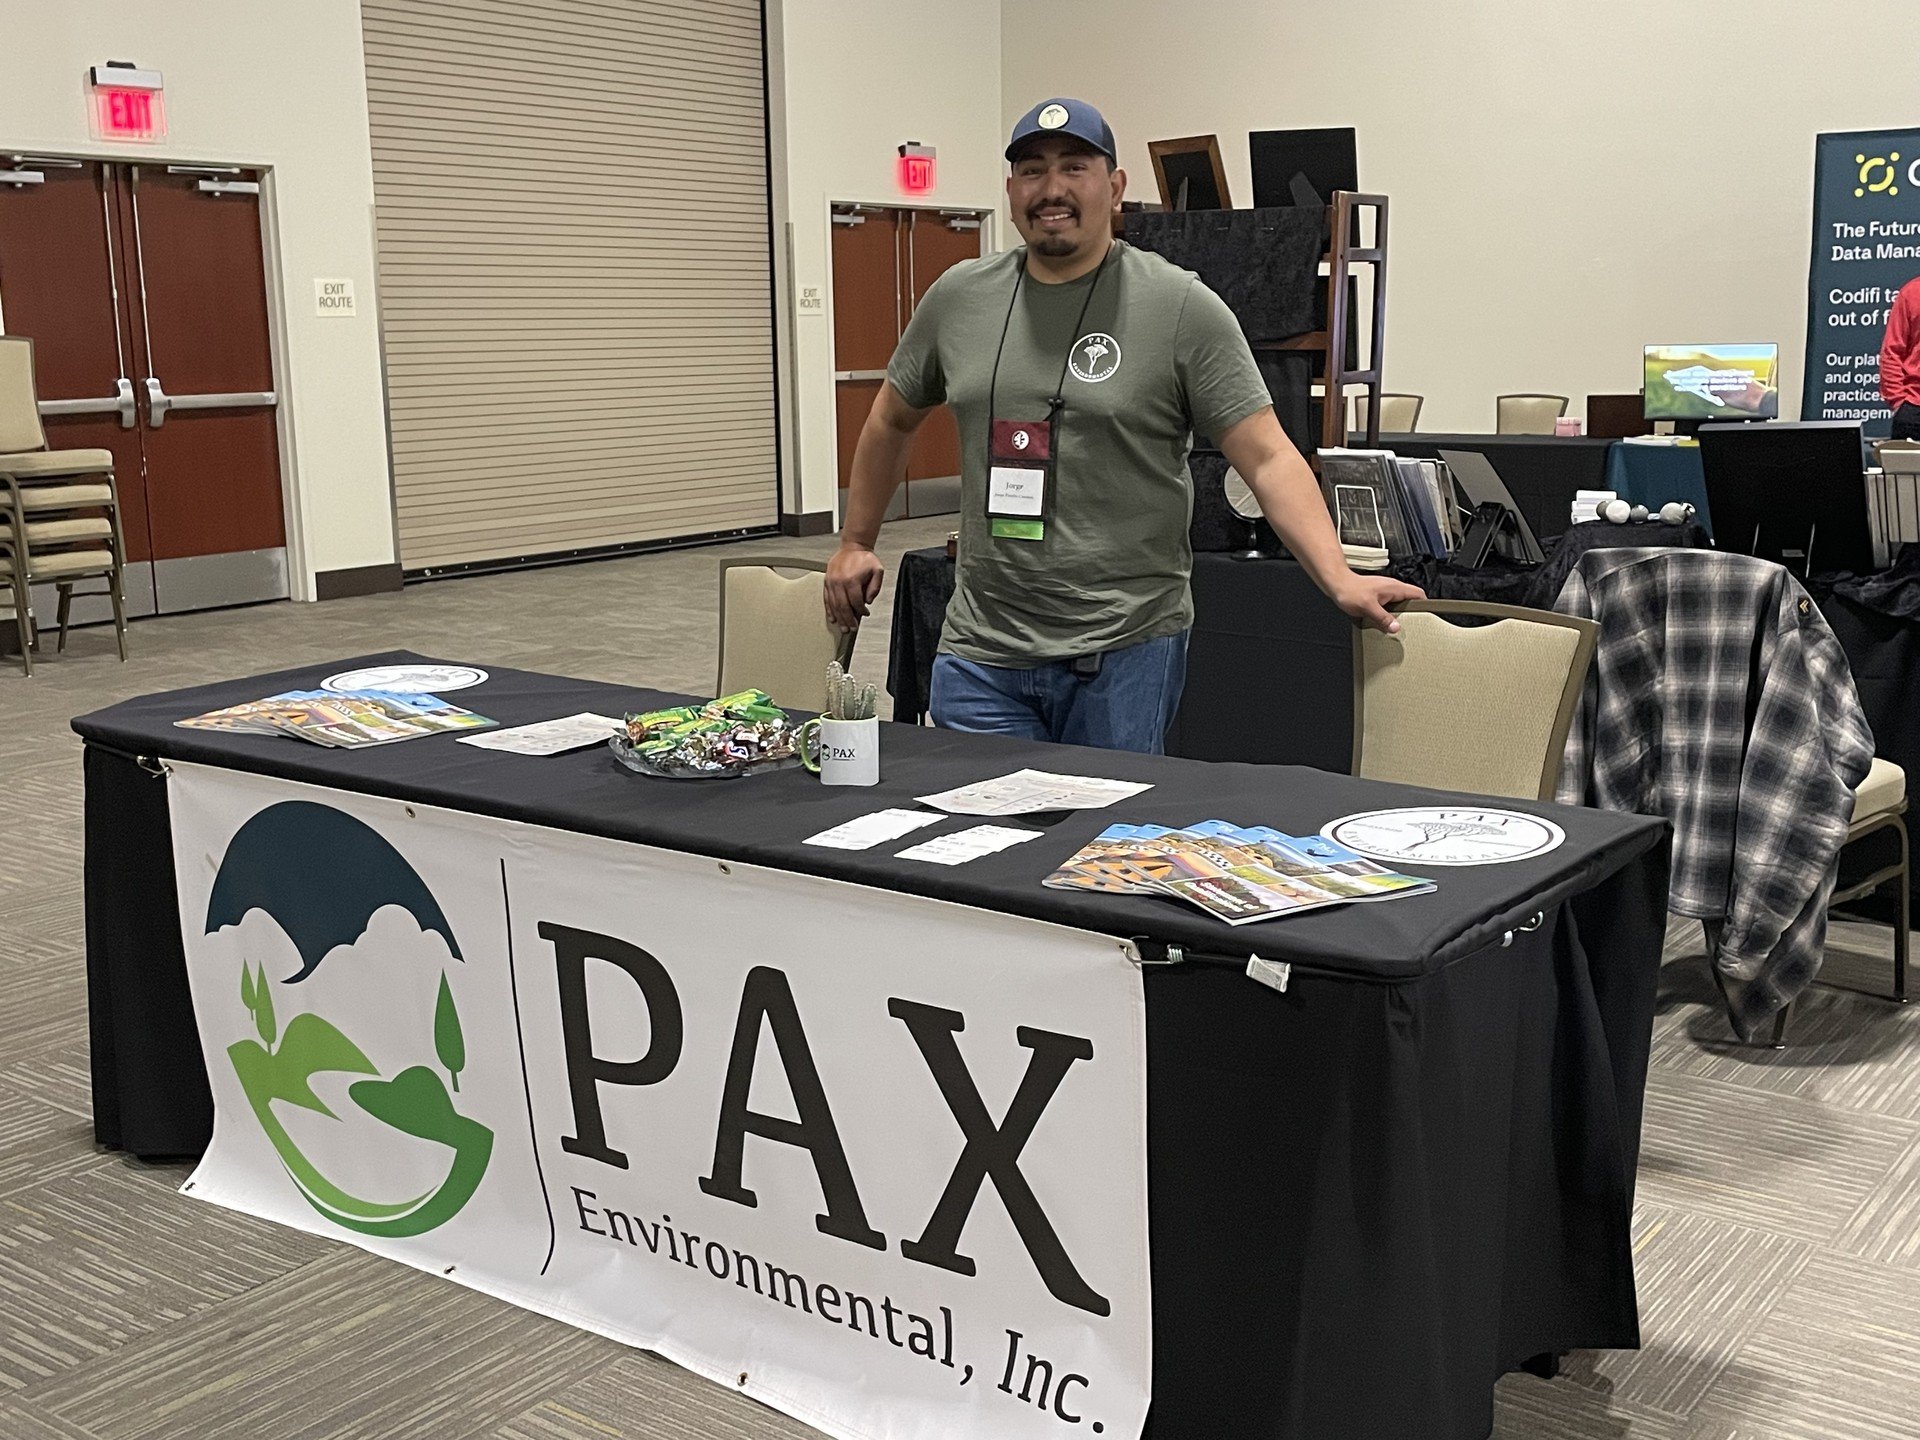 Pax Archeologists gathered at the Southern California Archaeology (SCA) Conference in Riverside this past March to attend symposia on maritime archaeology, landscape studies for land management, and Indigenous archaeology. Aside from advancing their 